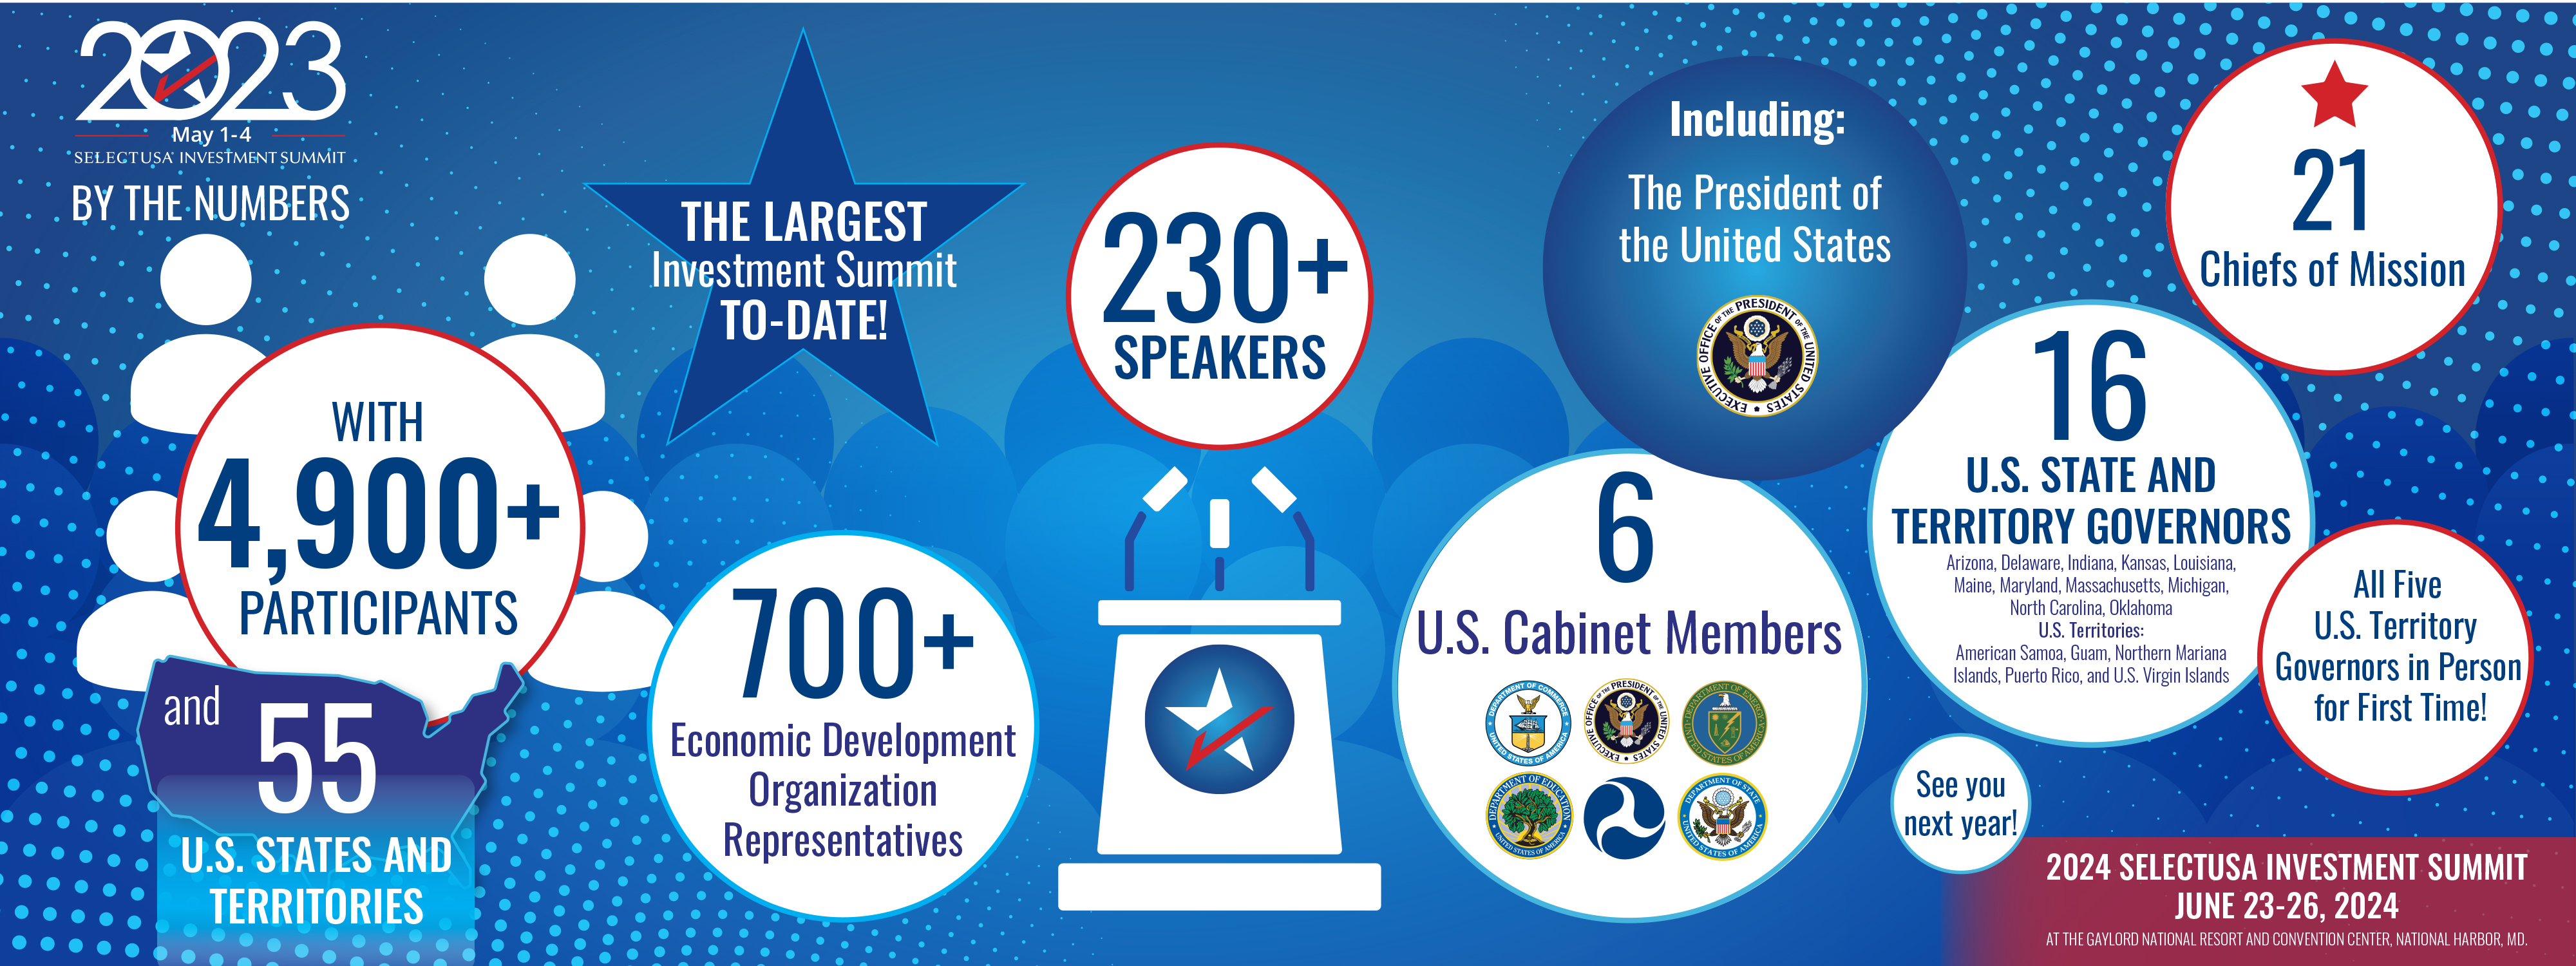 2023 SelectUSA Investment Summit Participant Highlights Graphic